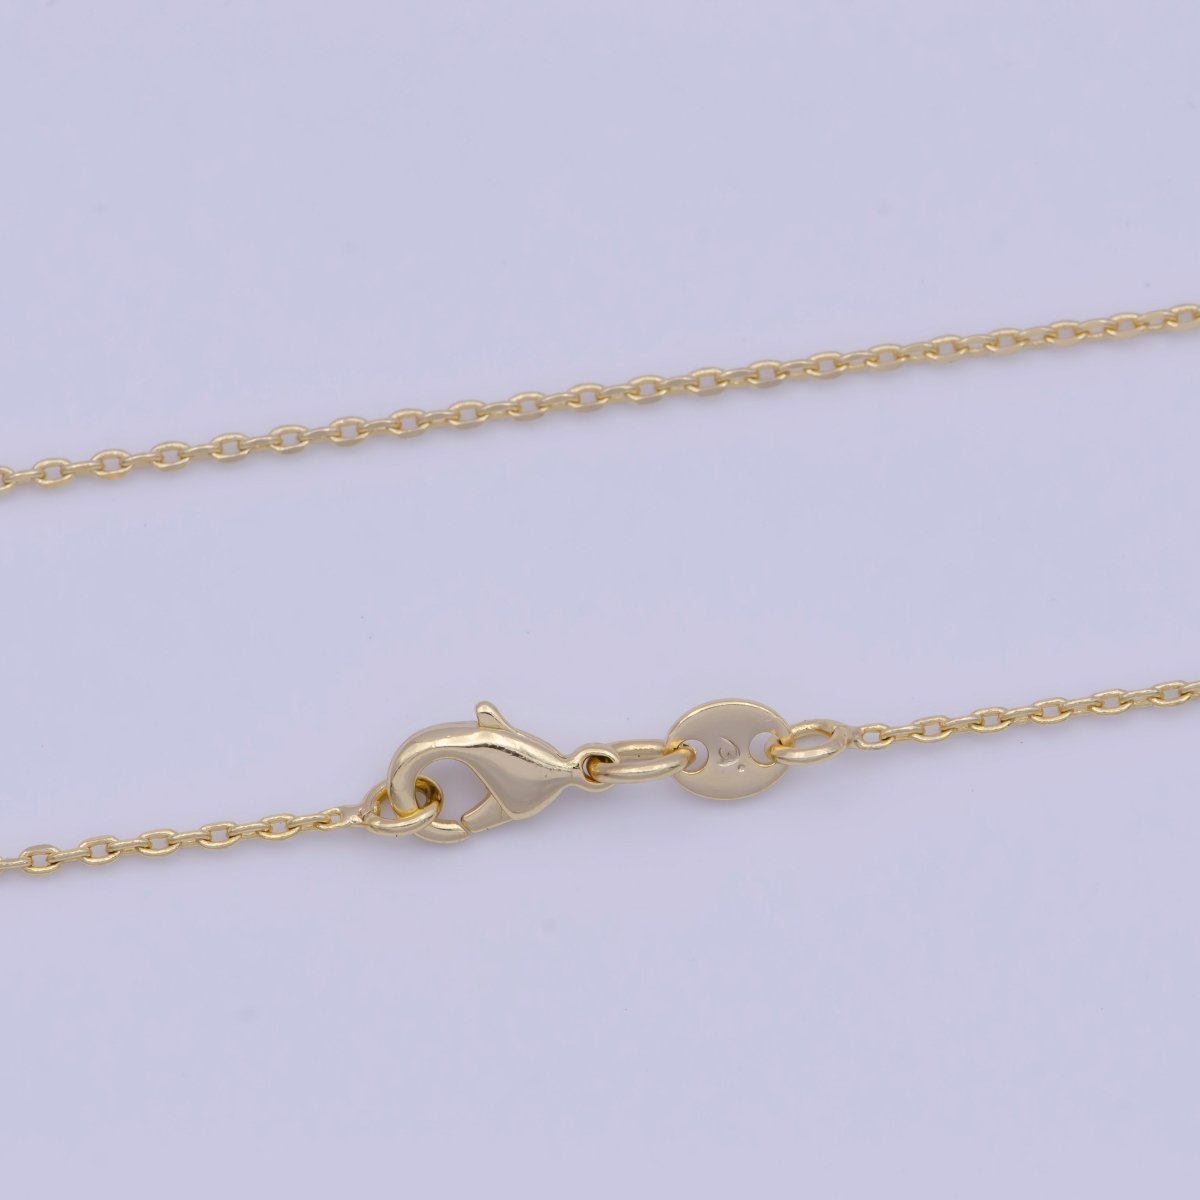 14K Gold Filled Cable Chain Minimalist Necklace Fine Link Chain Necklace 18 inch Length, 0.6mm Width Ready to Wear | WA-1112 Clearance Pricing - DLUXCA